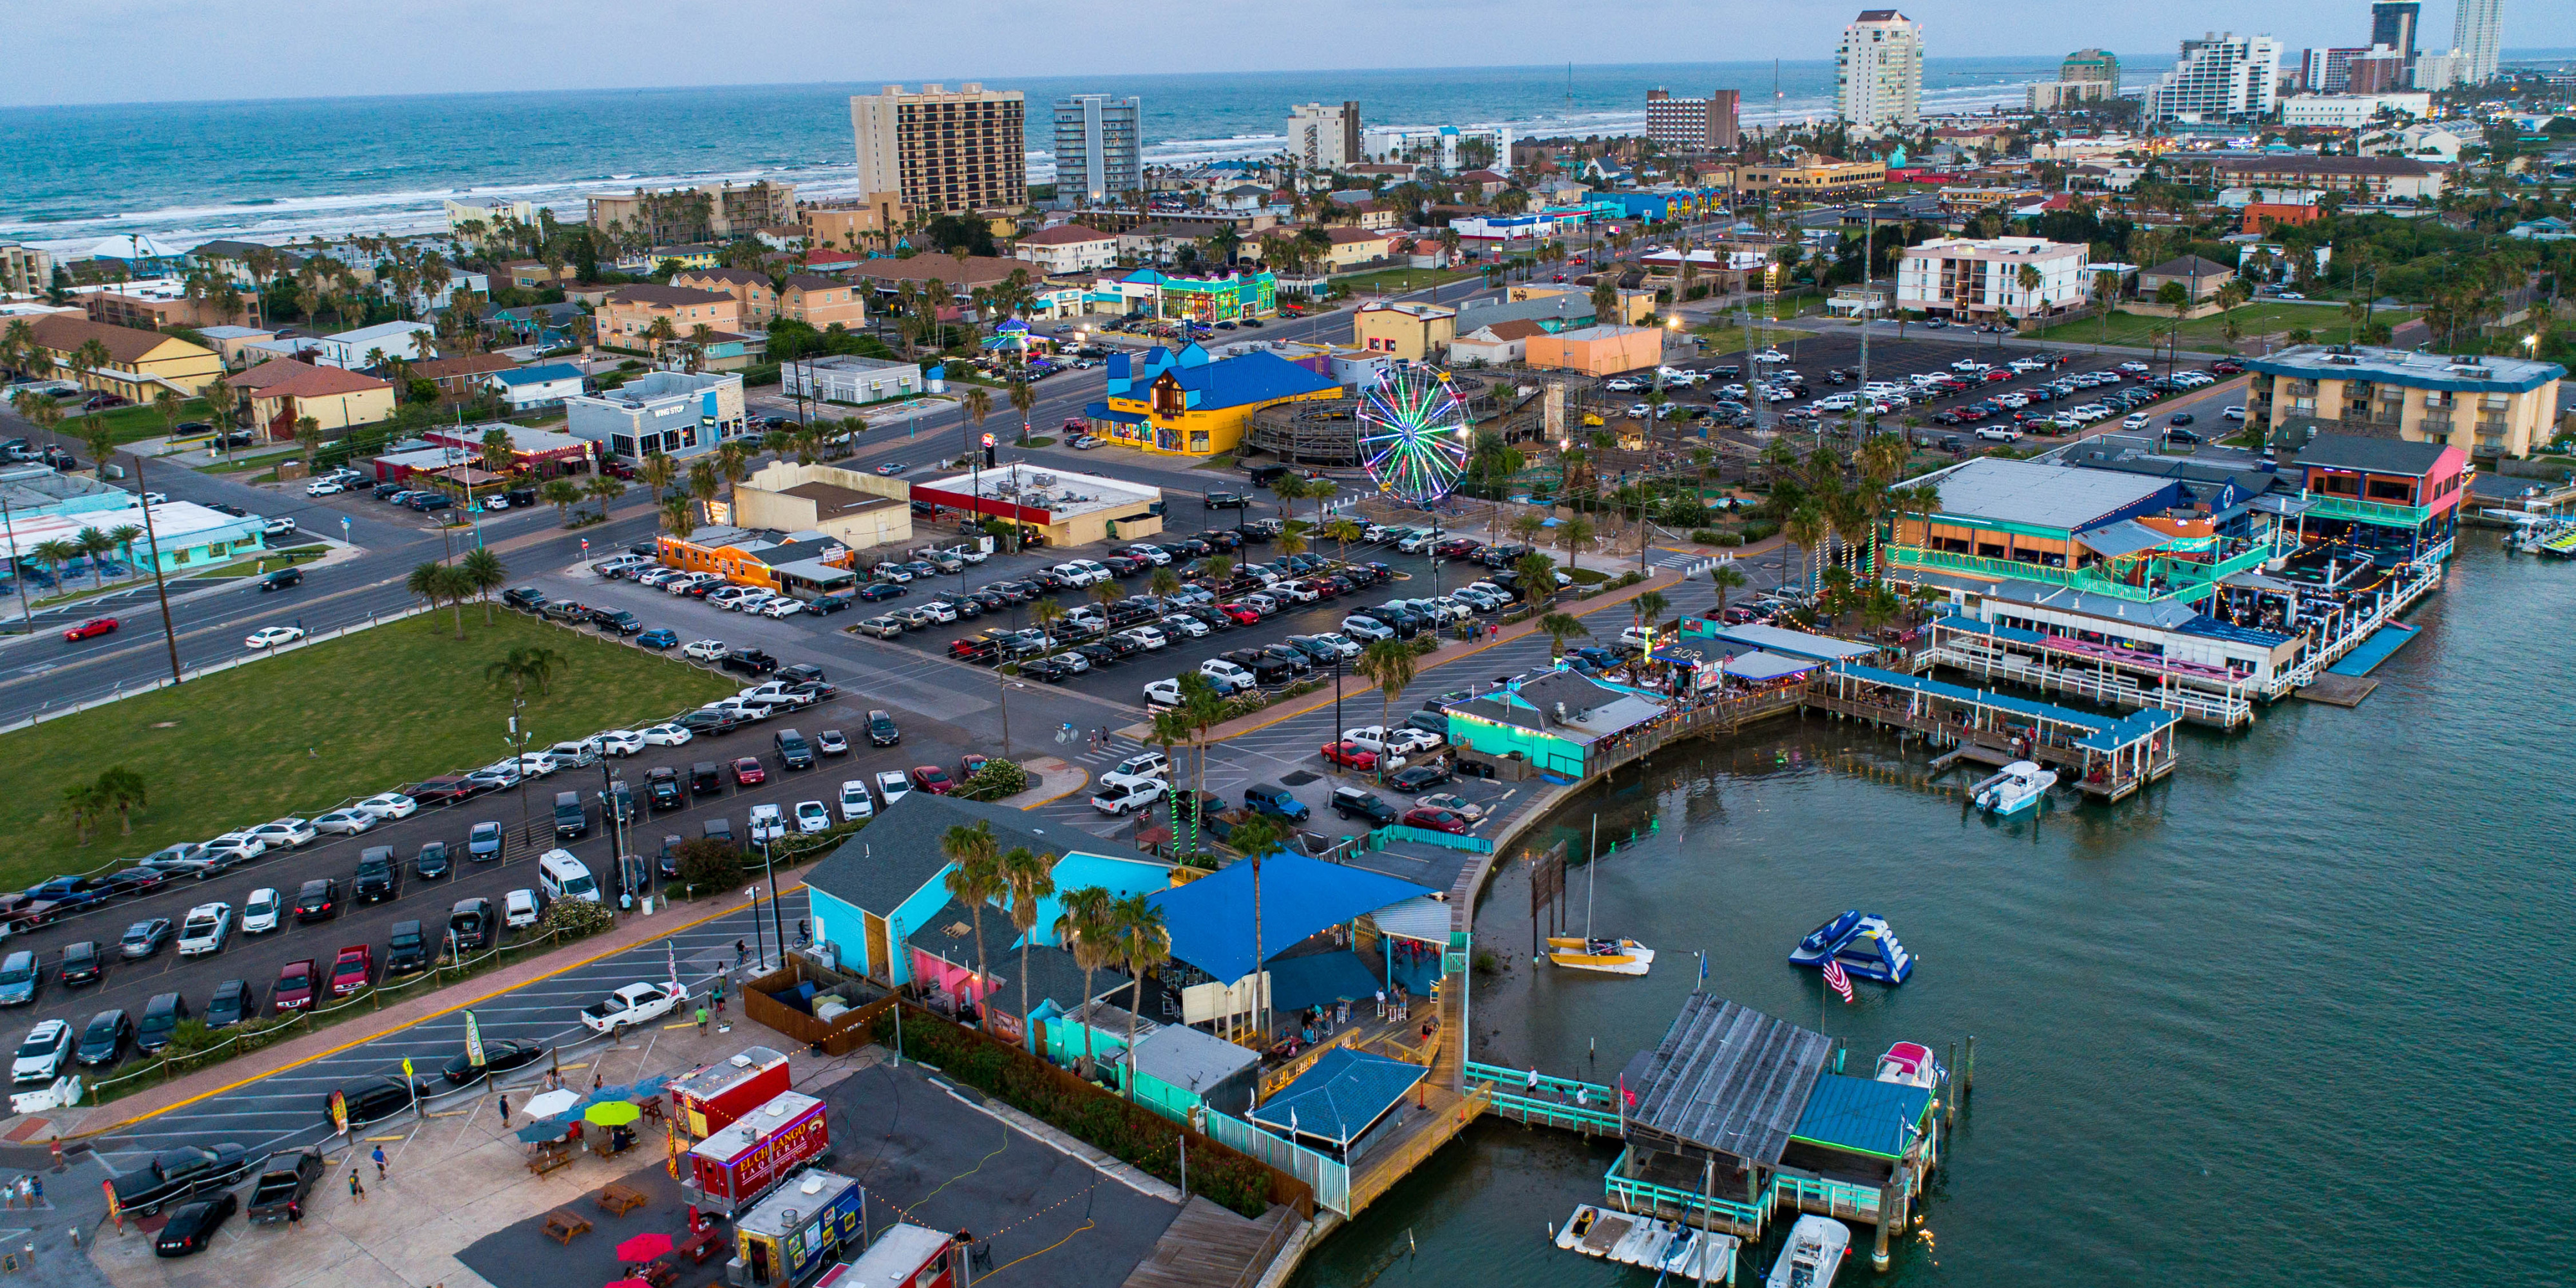 south padre island aerial view